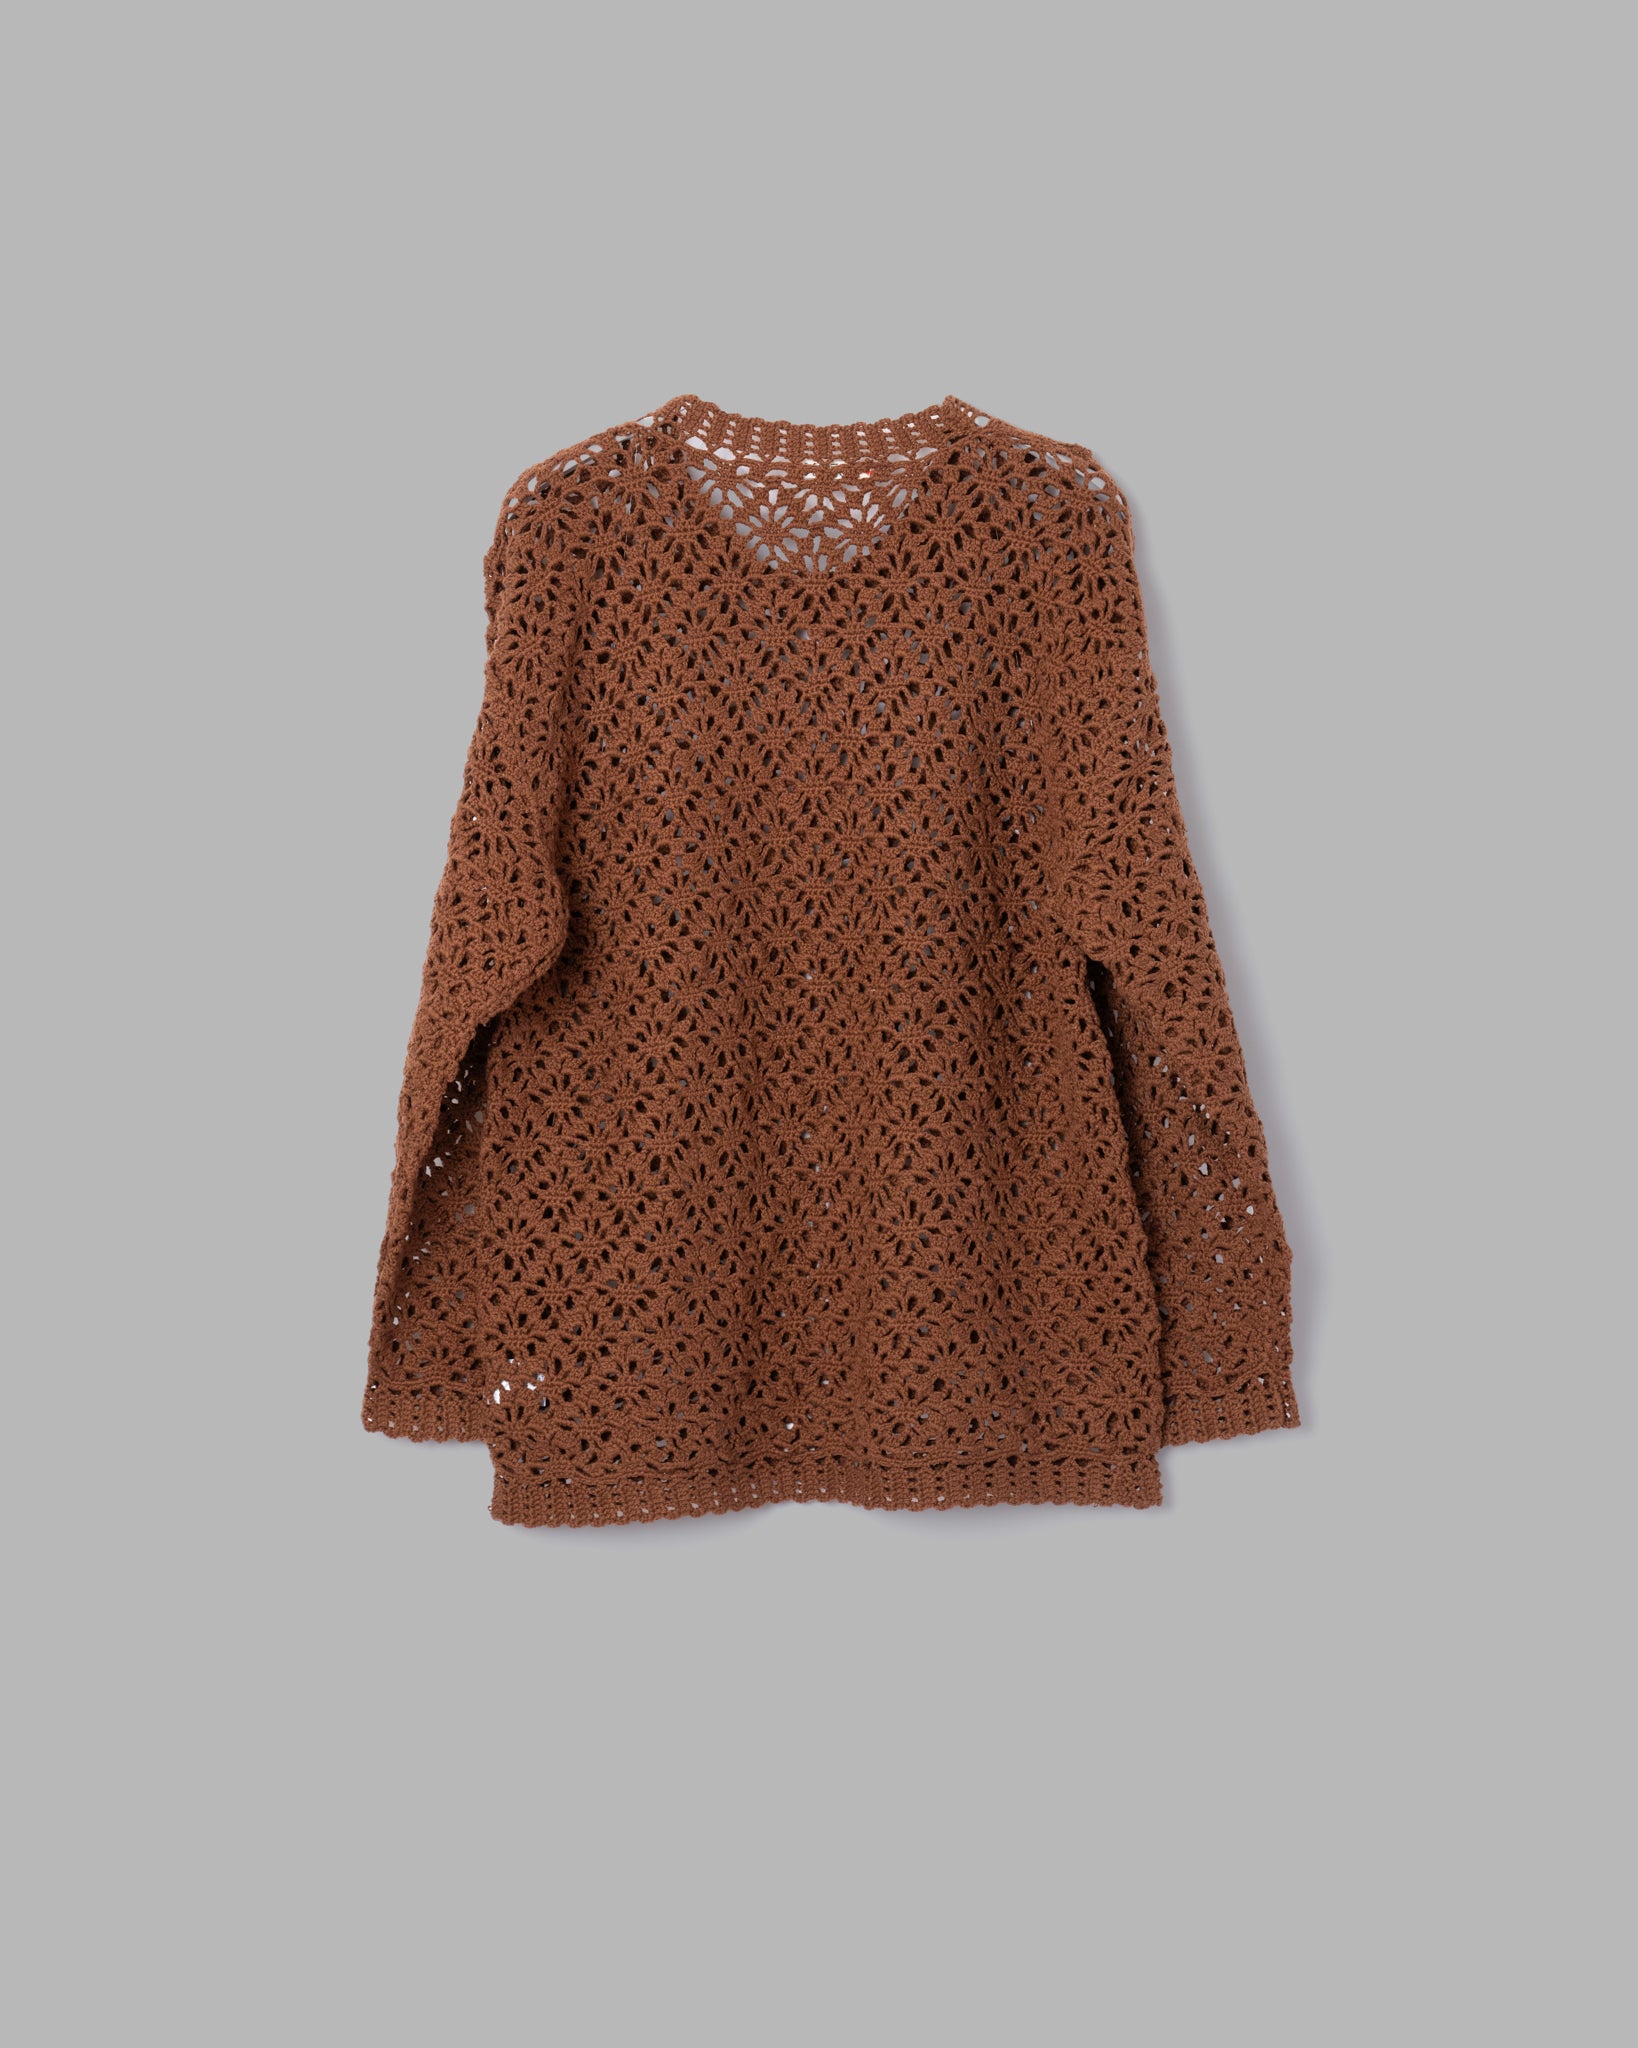 CROCHET HAND KNIT PULLOVER SWEATER - BROWN